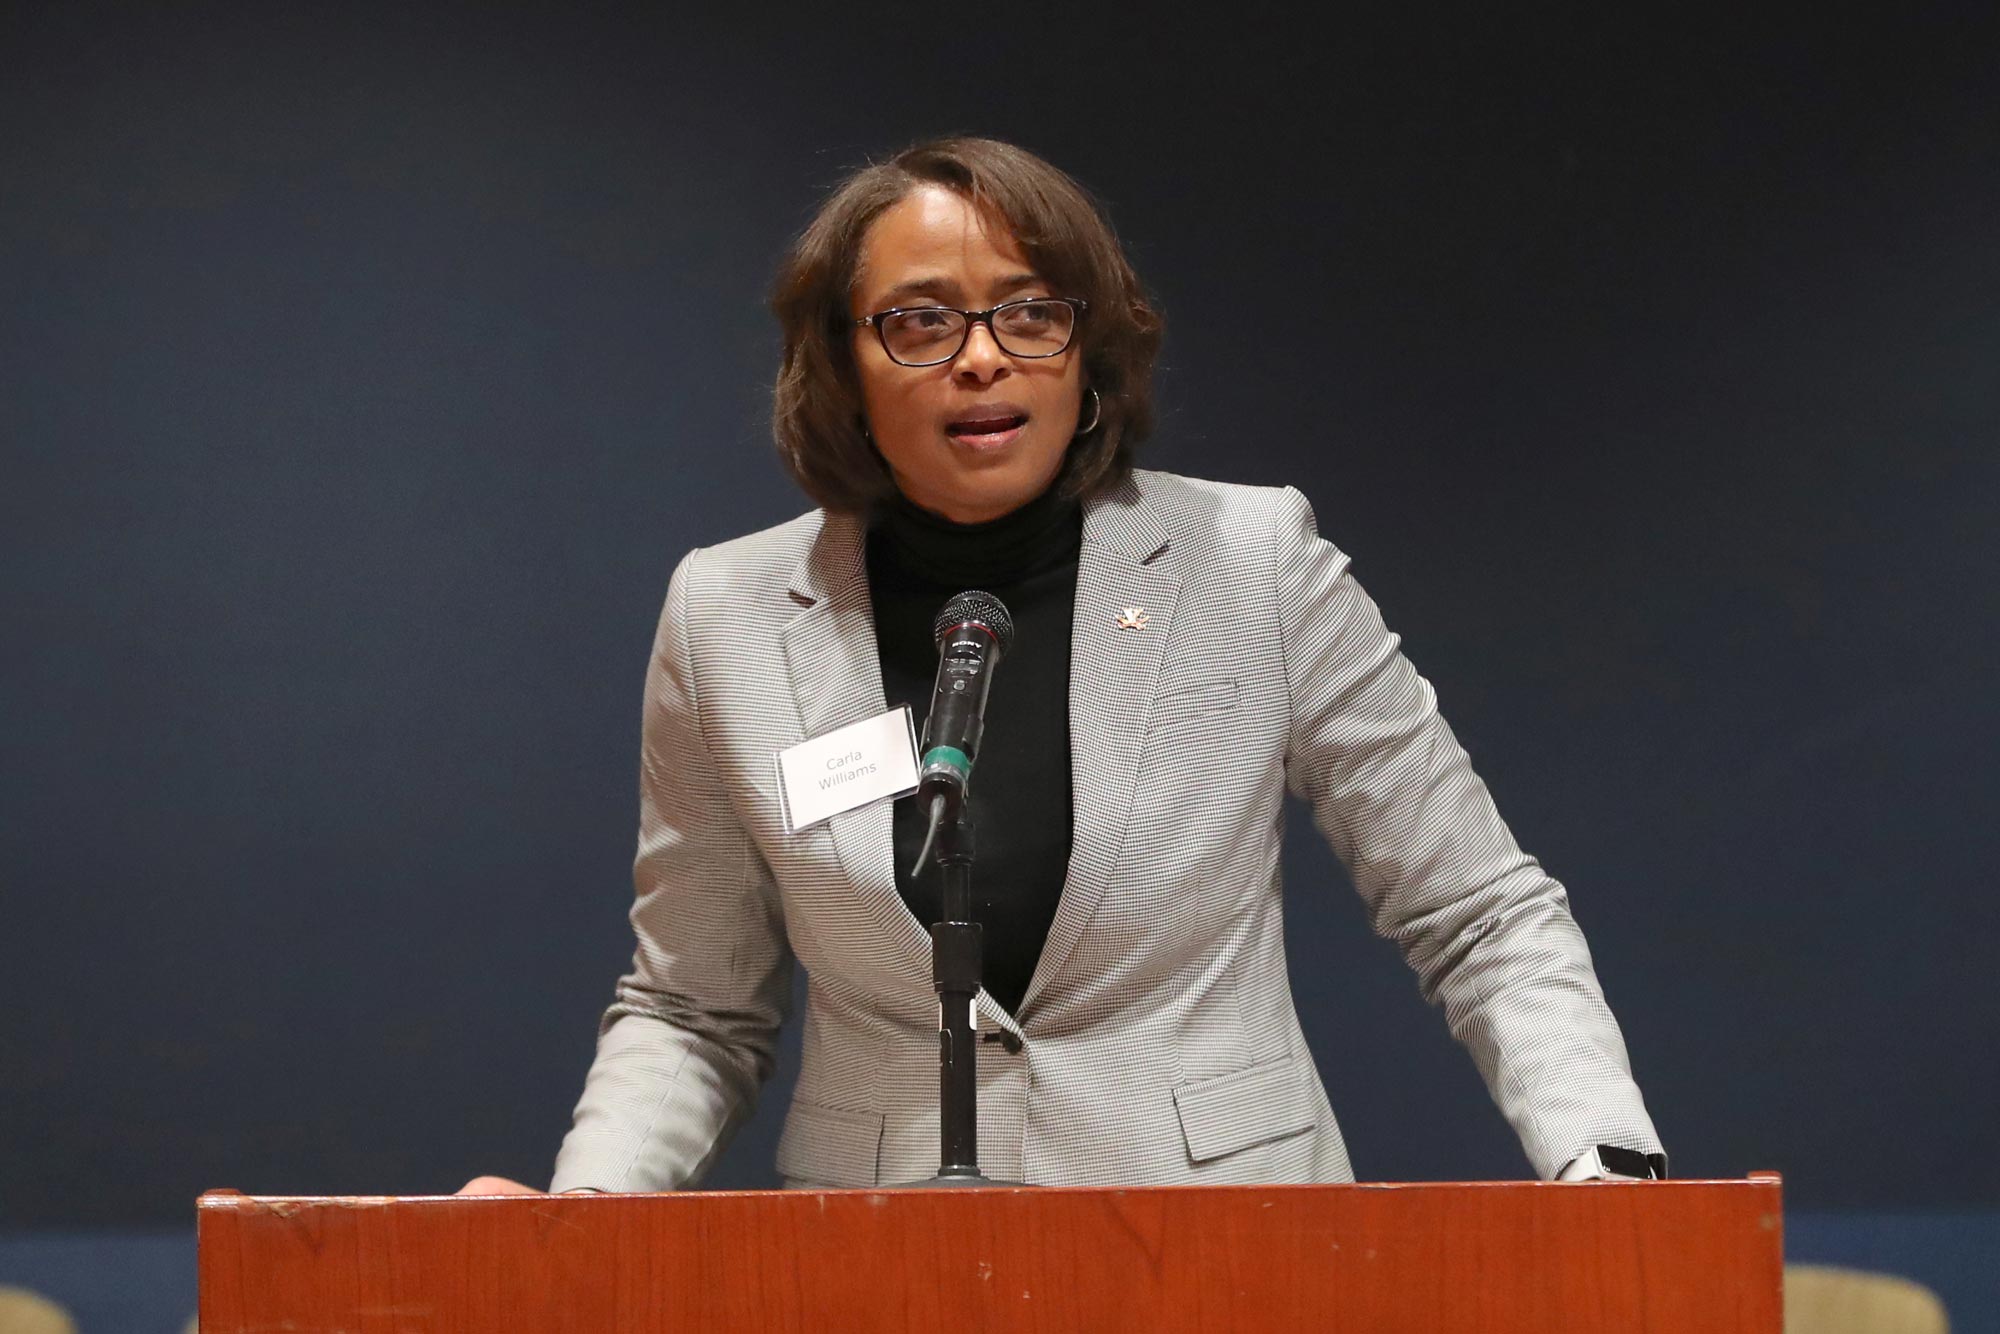 Carla Williams standing at a podium speaking to a crowd